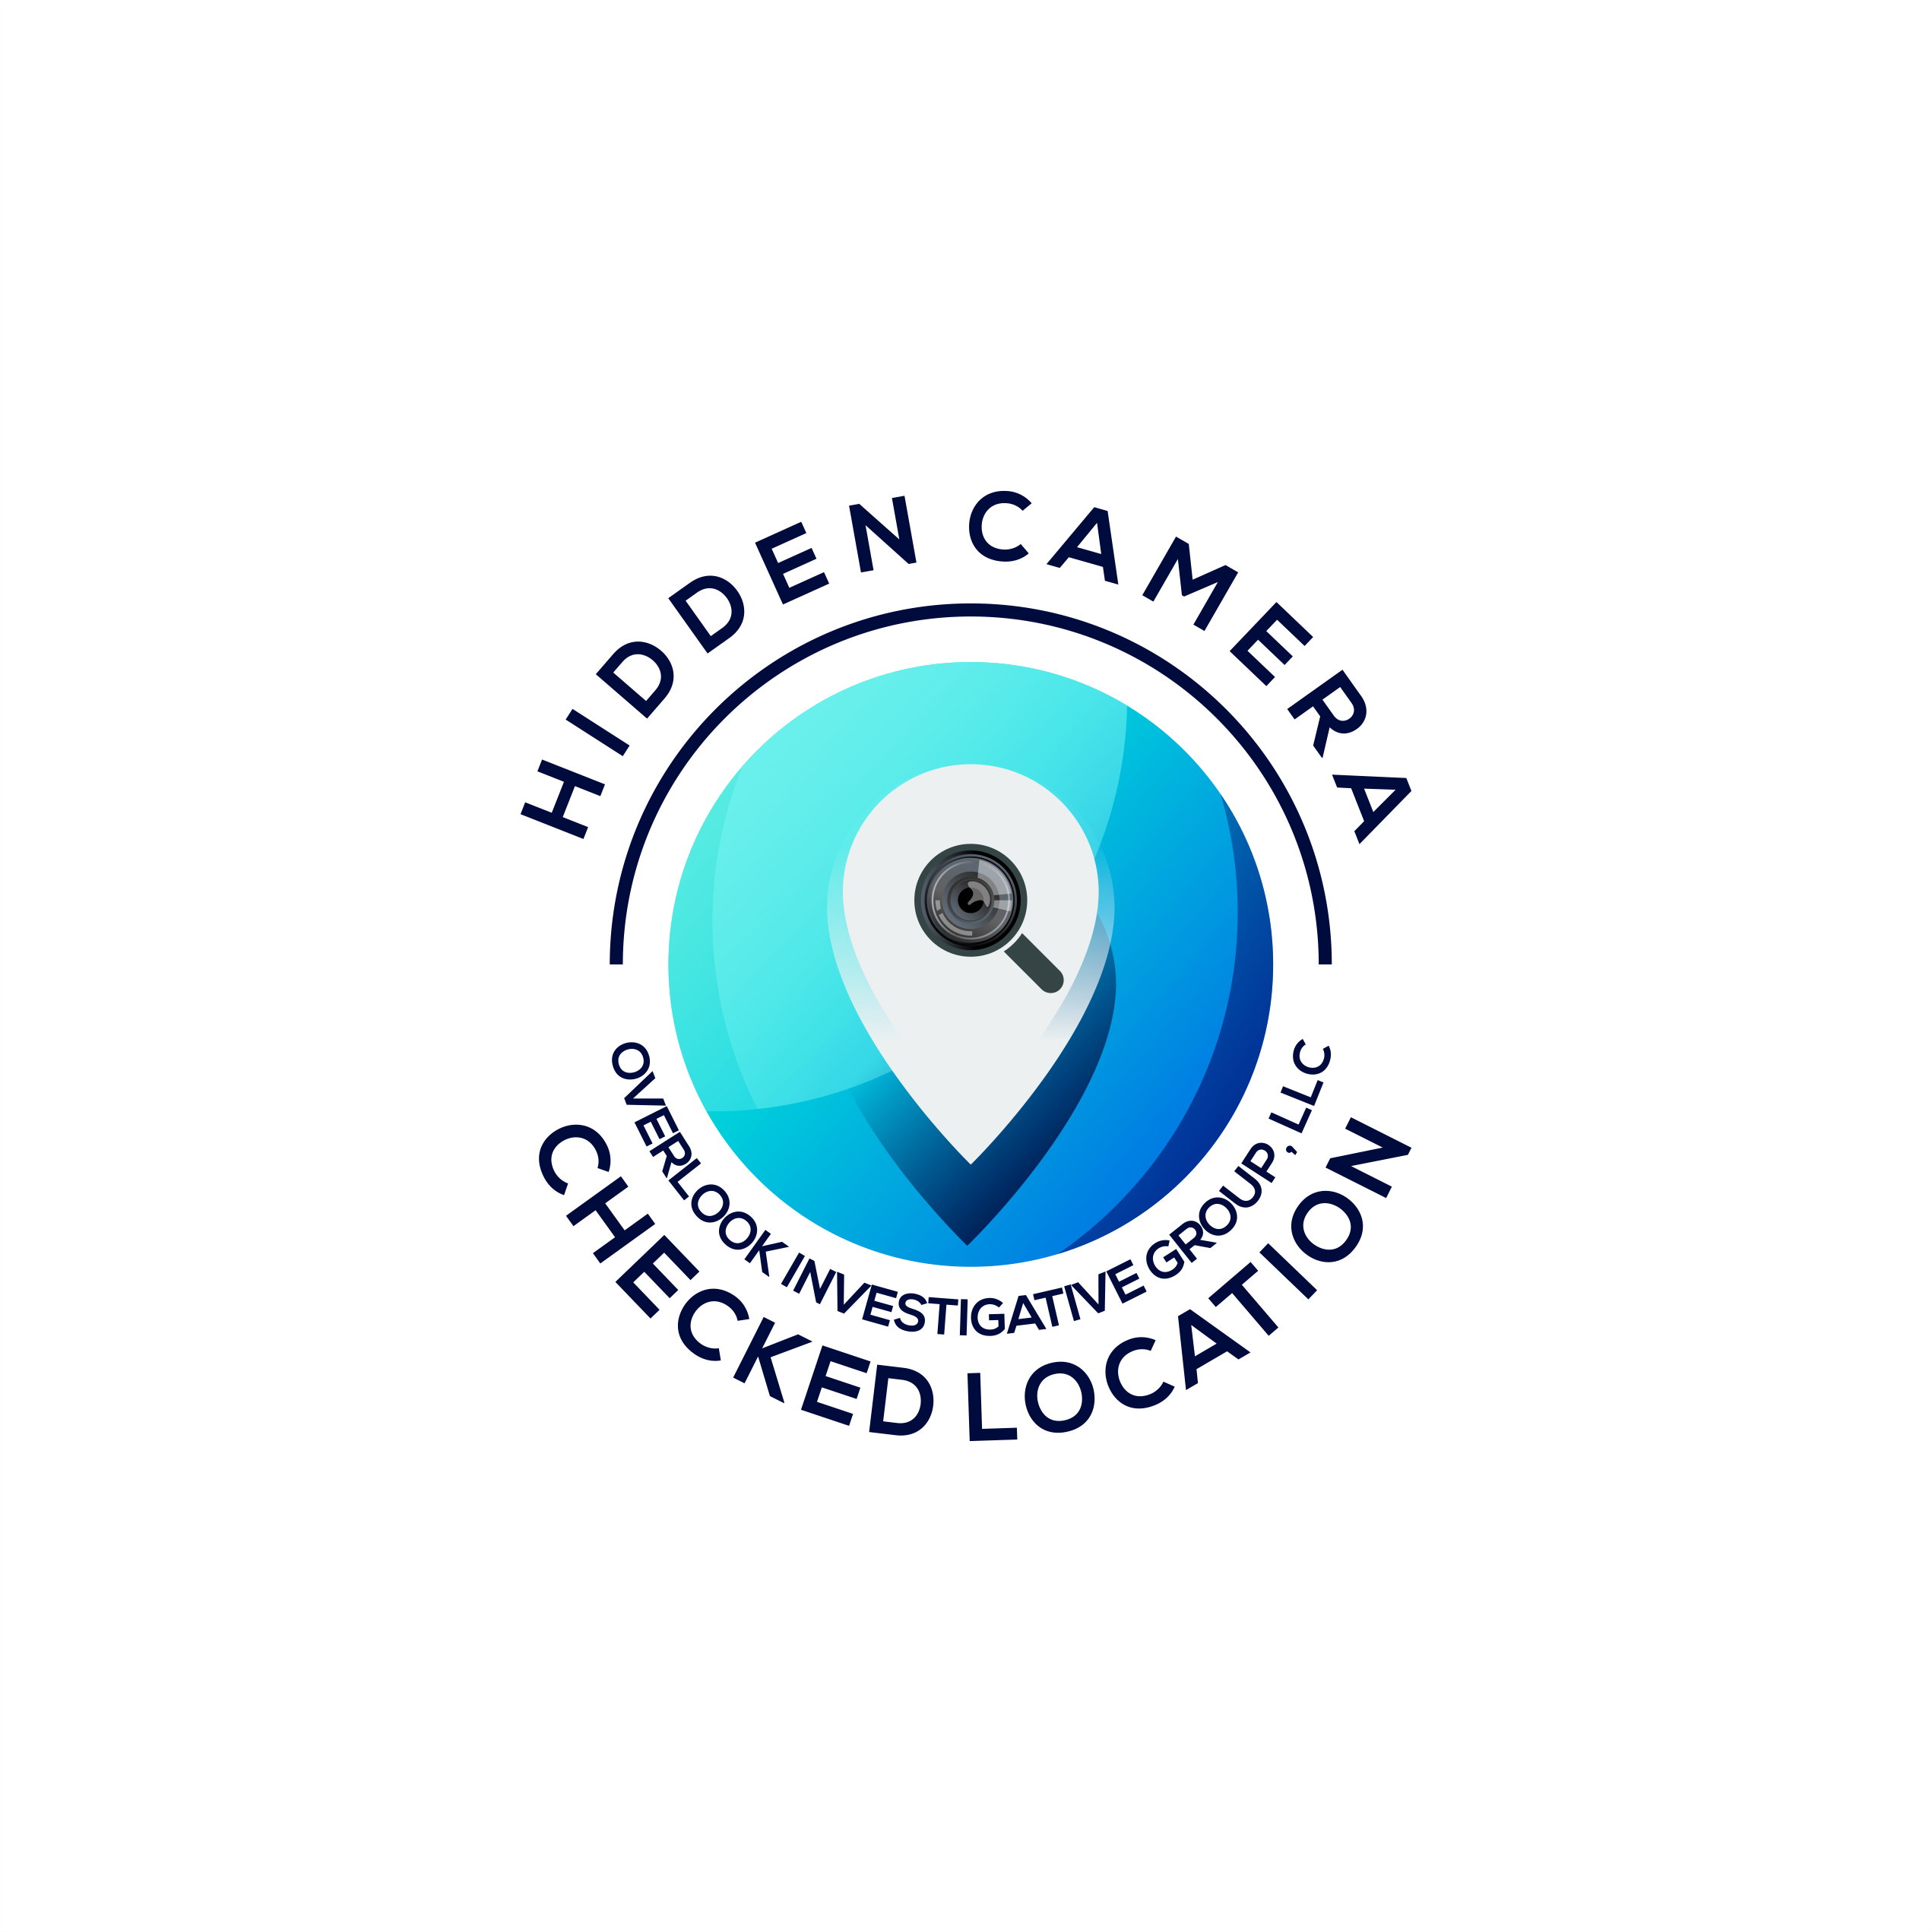 Overlook Investigative Group, LLC Announces the Launch of Hidden Camera Checked Location Program